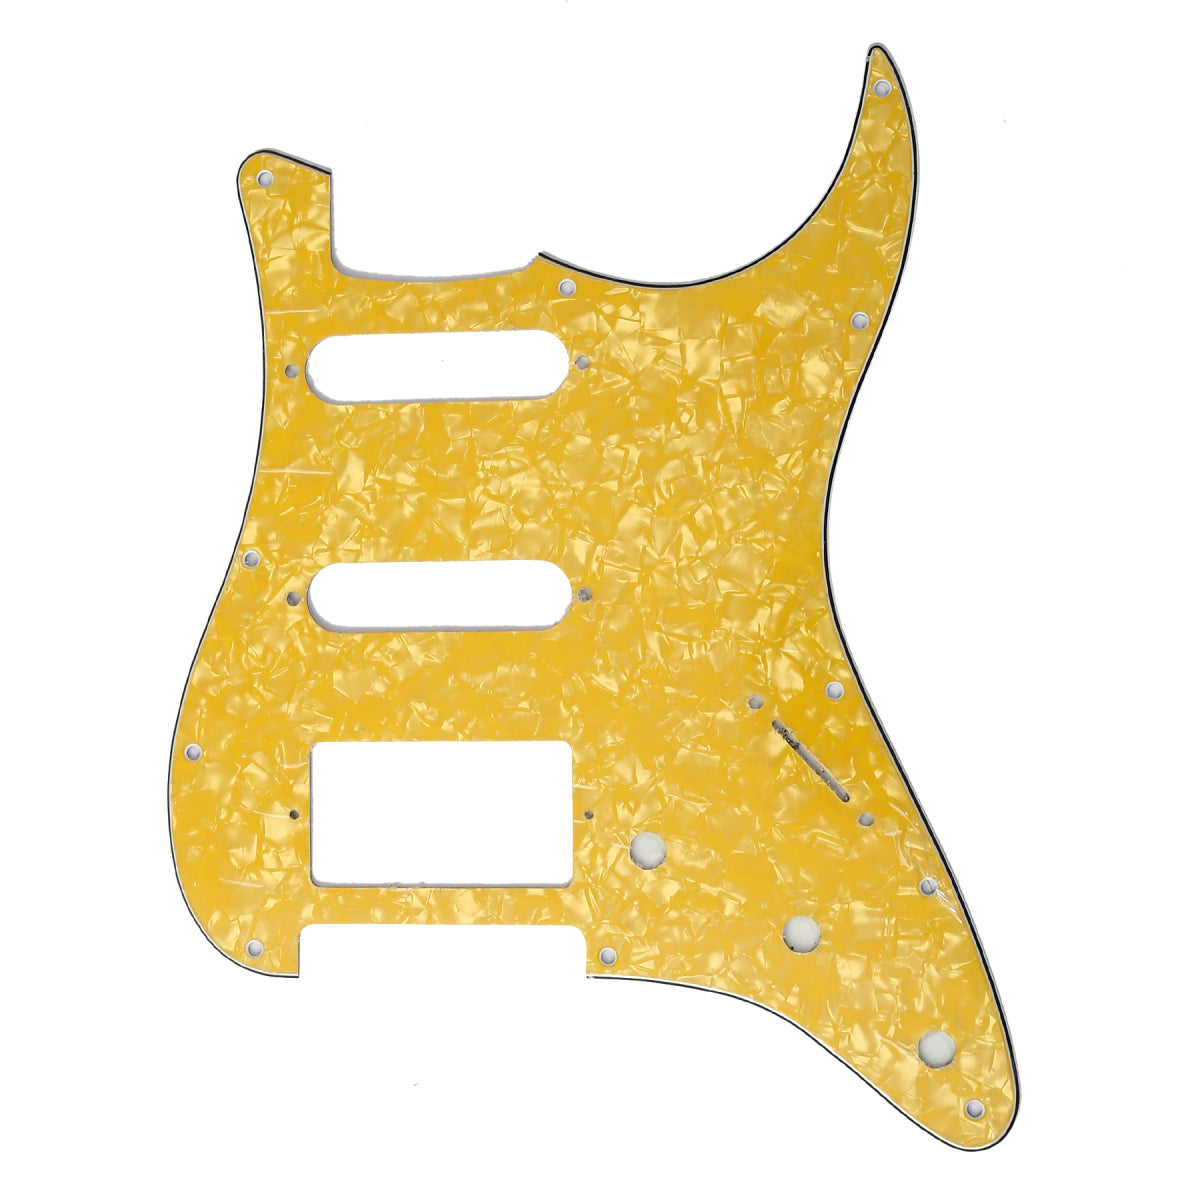 Musiclily HSS 11 Hole Guitar Strat Pickguard for Fender USA/Mexican Made Standard Stratocaster Modern Style,  4Ply Yellow Pearl